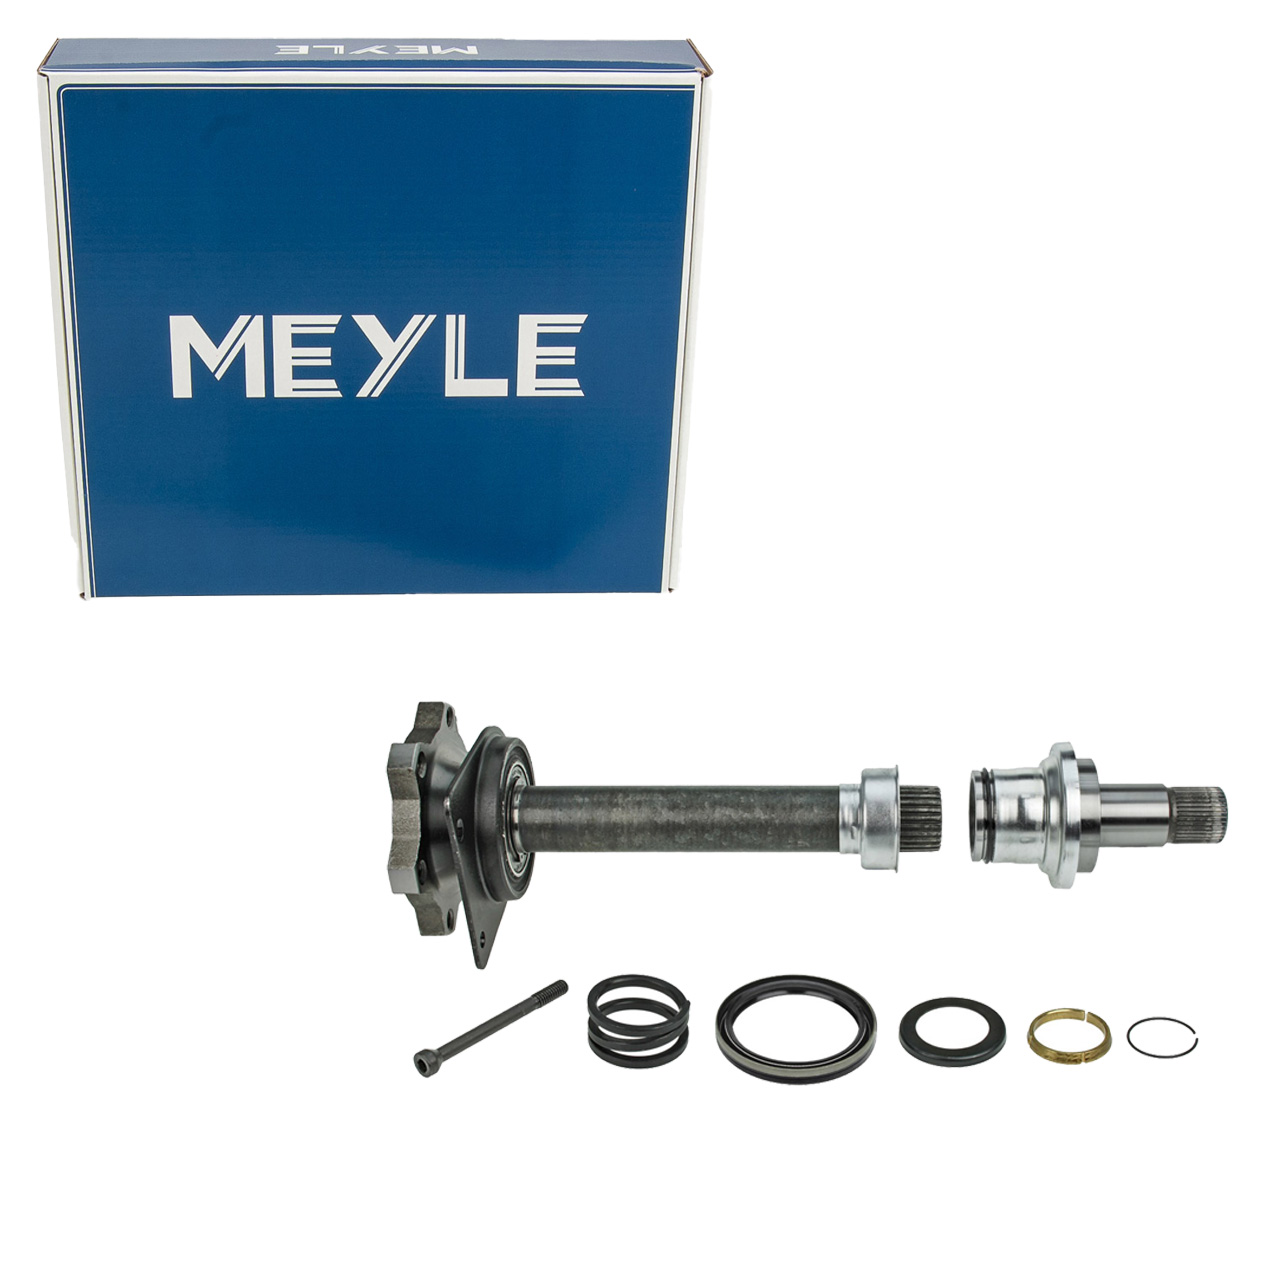 MEYLE 1004980244/S Steckwelle Differential VW Sharan 7M SEAT Alhambra FORD Galaxy 1 rechts